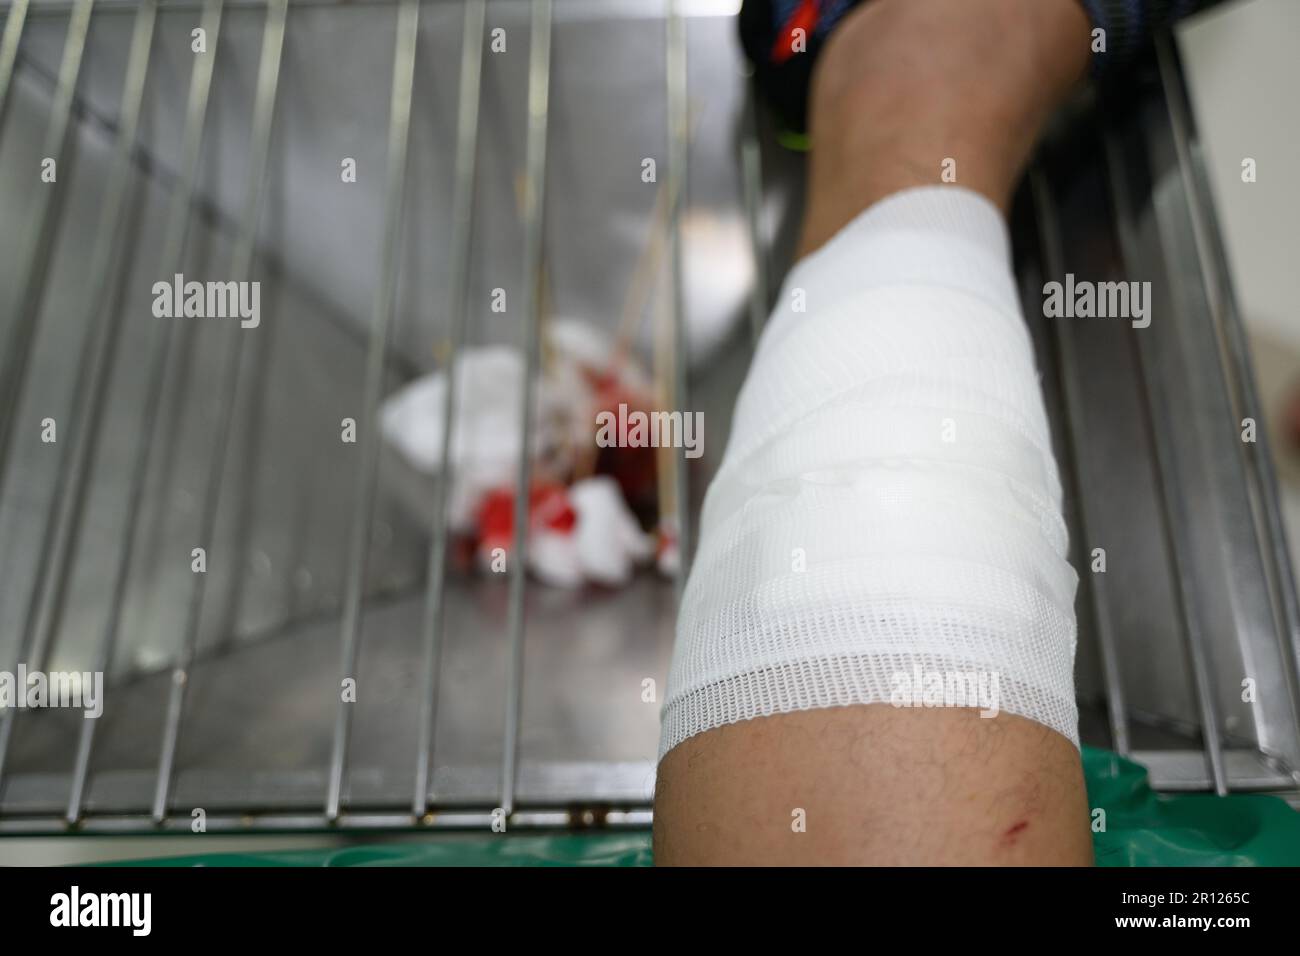 Nurses are treating a bleeding wound on the leg caused by an accident Stock Photo